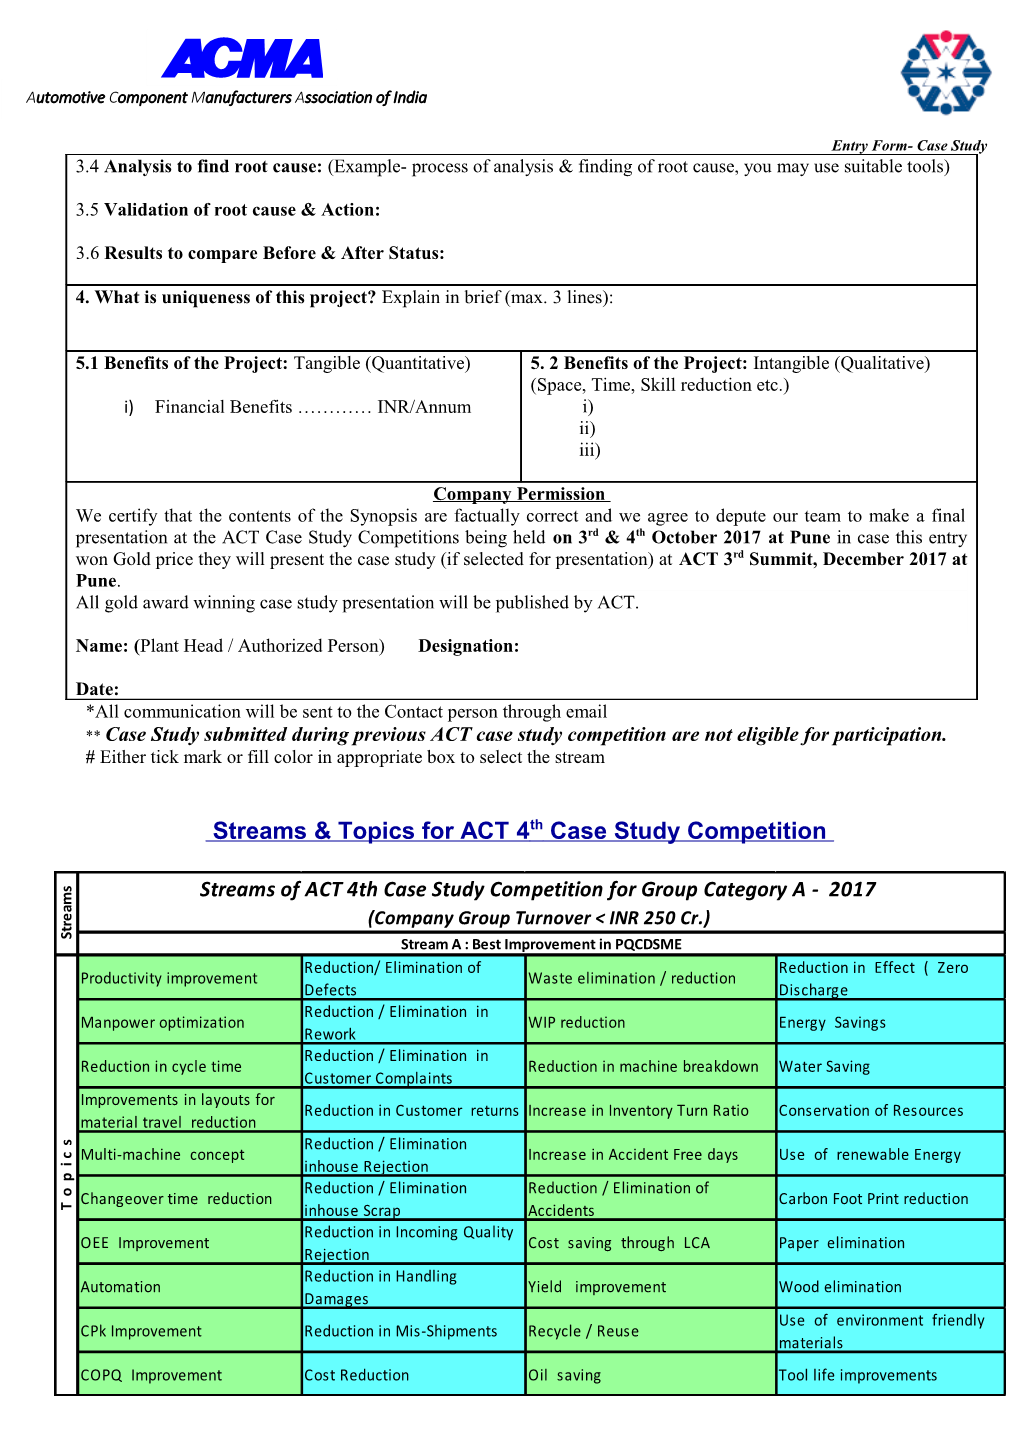 Entry Form- Case Study